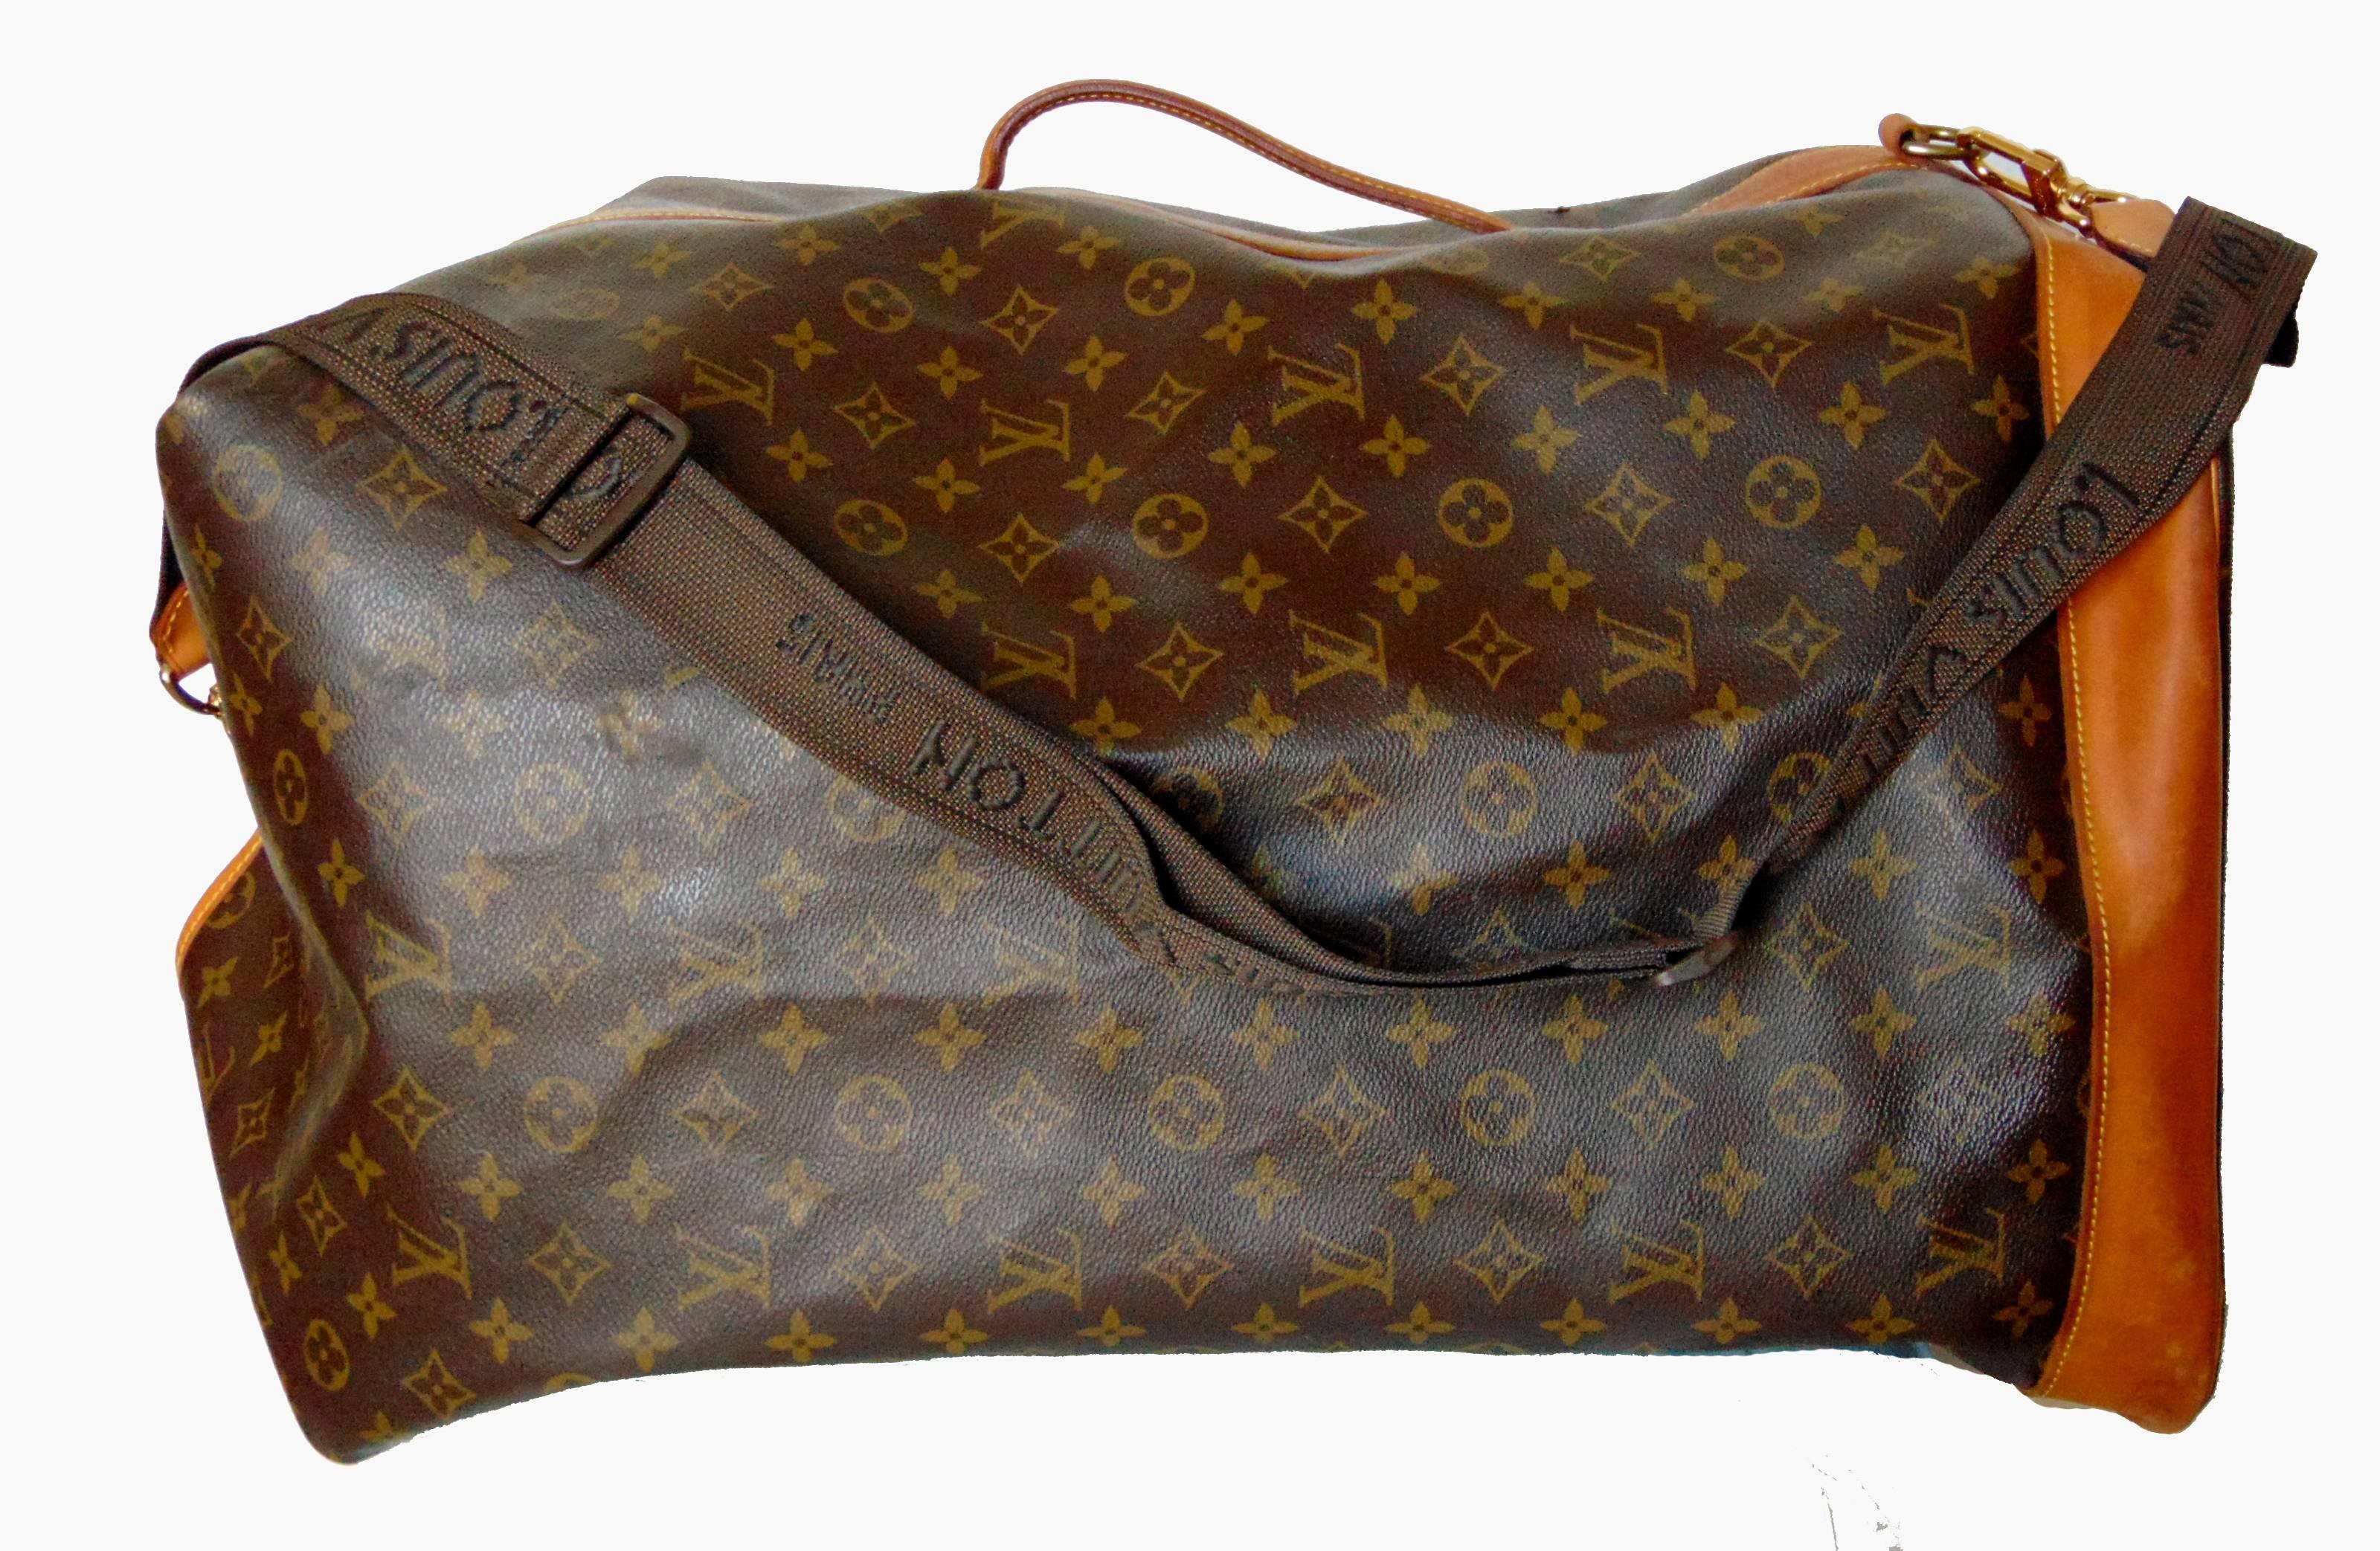 Travel in style with this incredible Louis Vuitton monogram Sac Marin GM. This vintage travel bag was created in 1990 by Louis Vuitton.  In very good condition for its 17+ years of age, we note wear and rubs to the vachetta leather trim, most